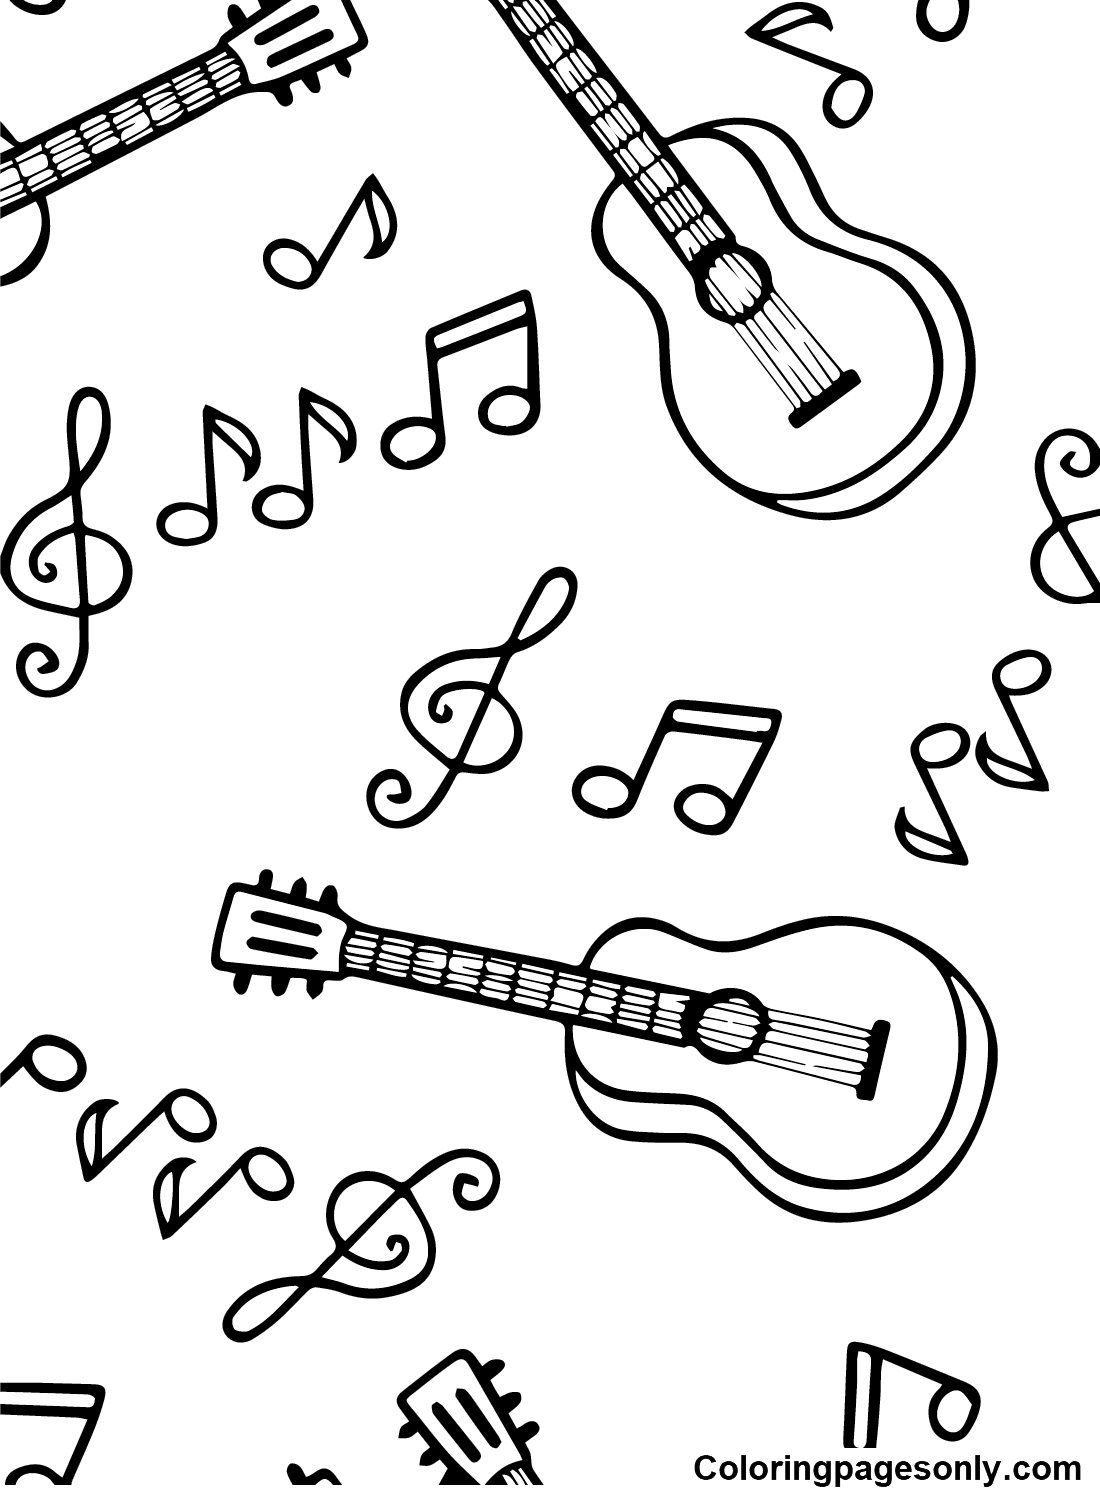 Guitar Free Coloring Page